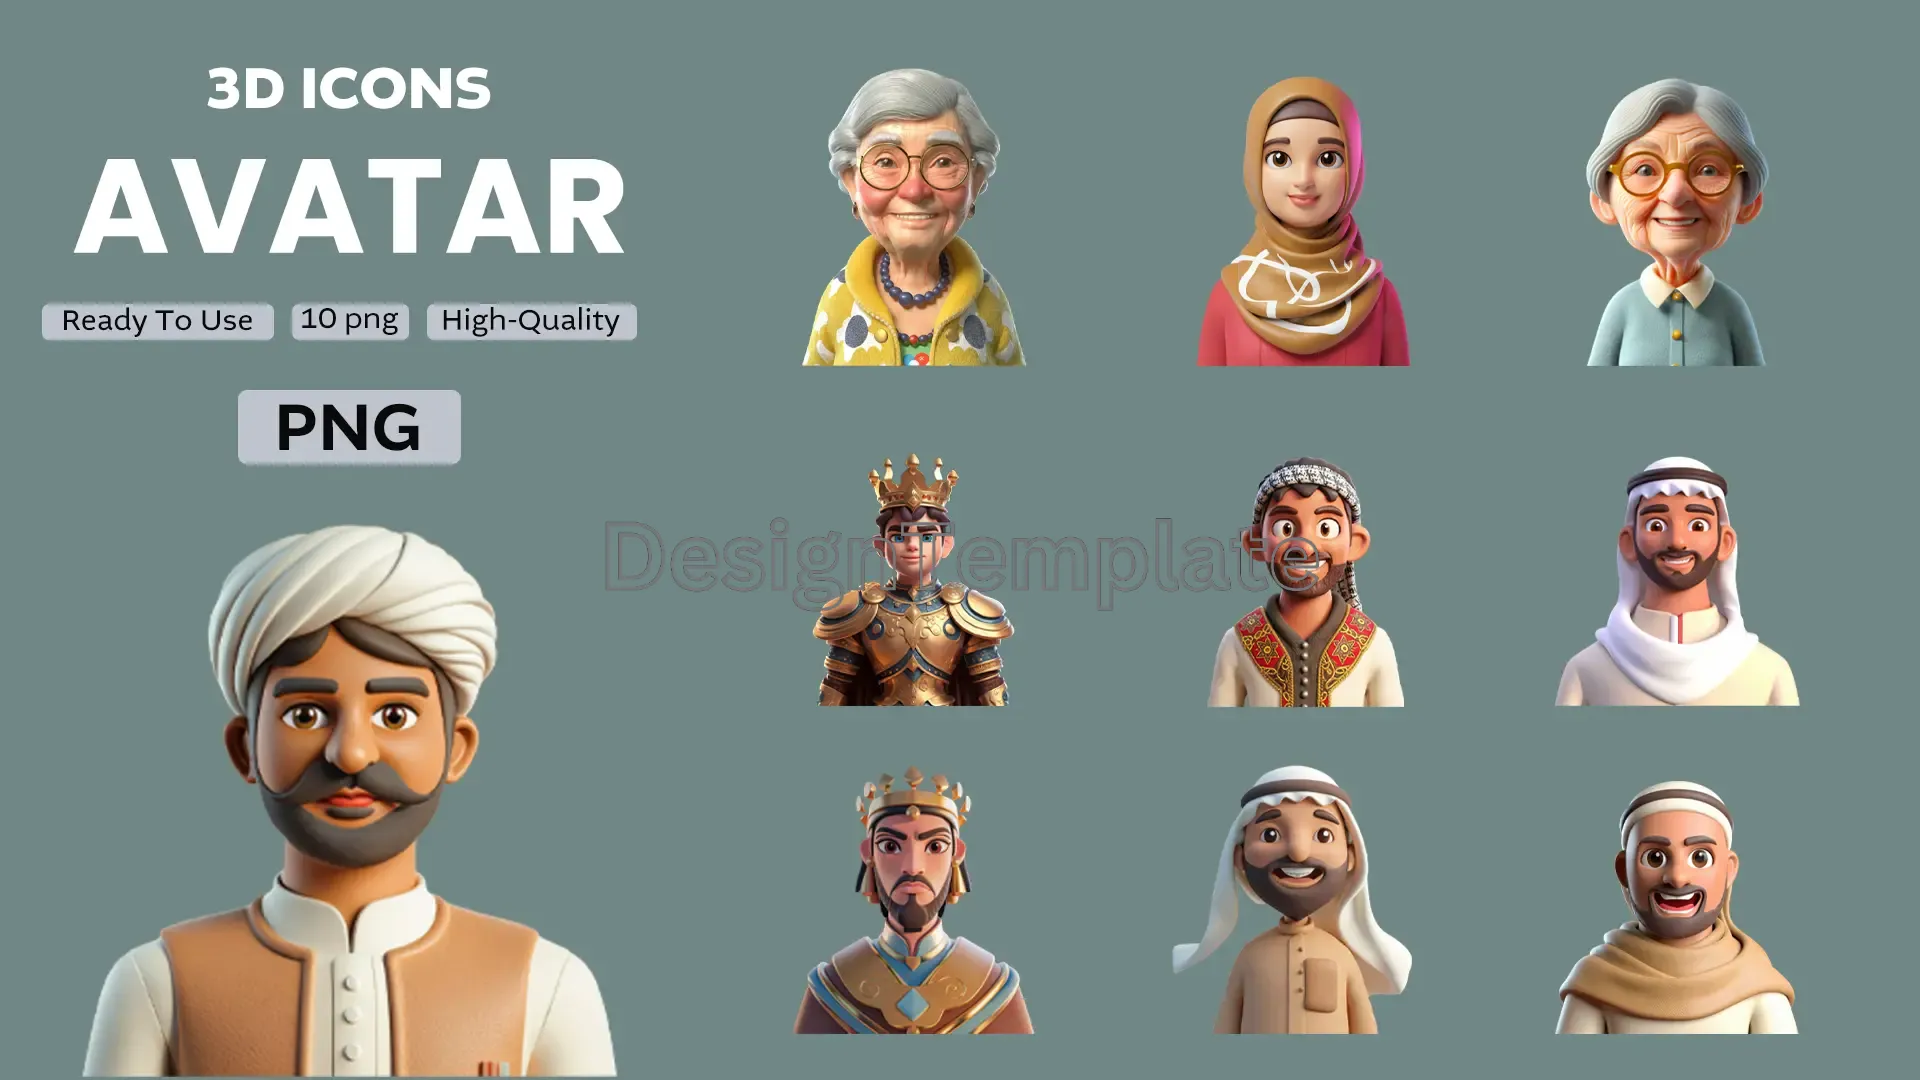 Multicultural 3D Avatar Icons Collection